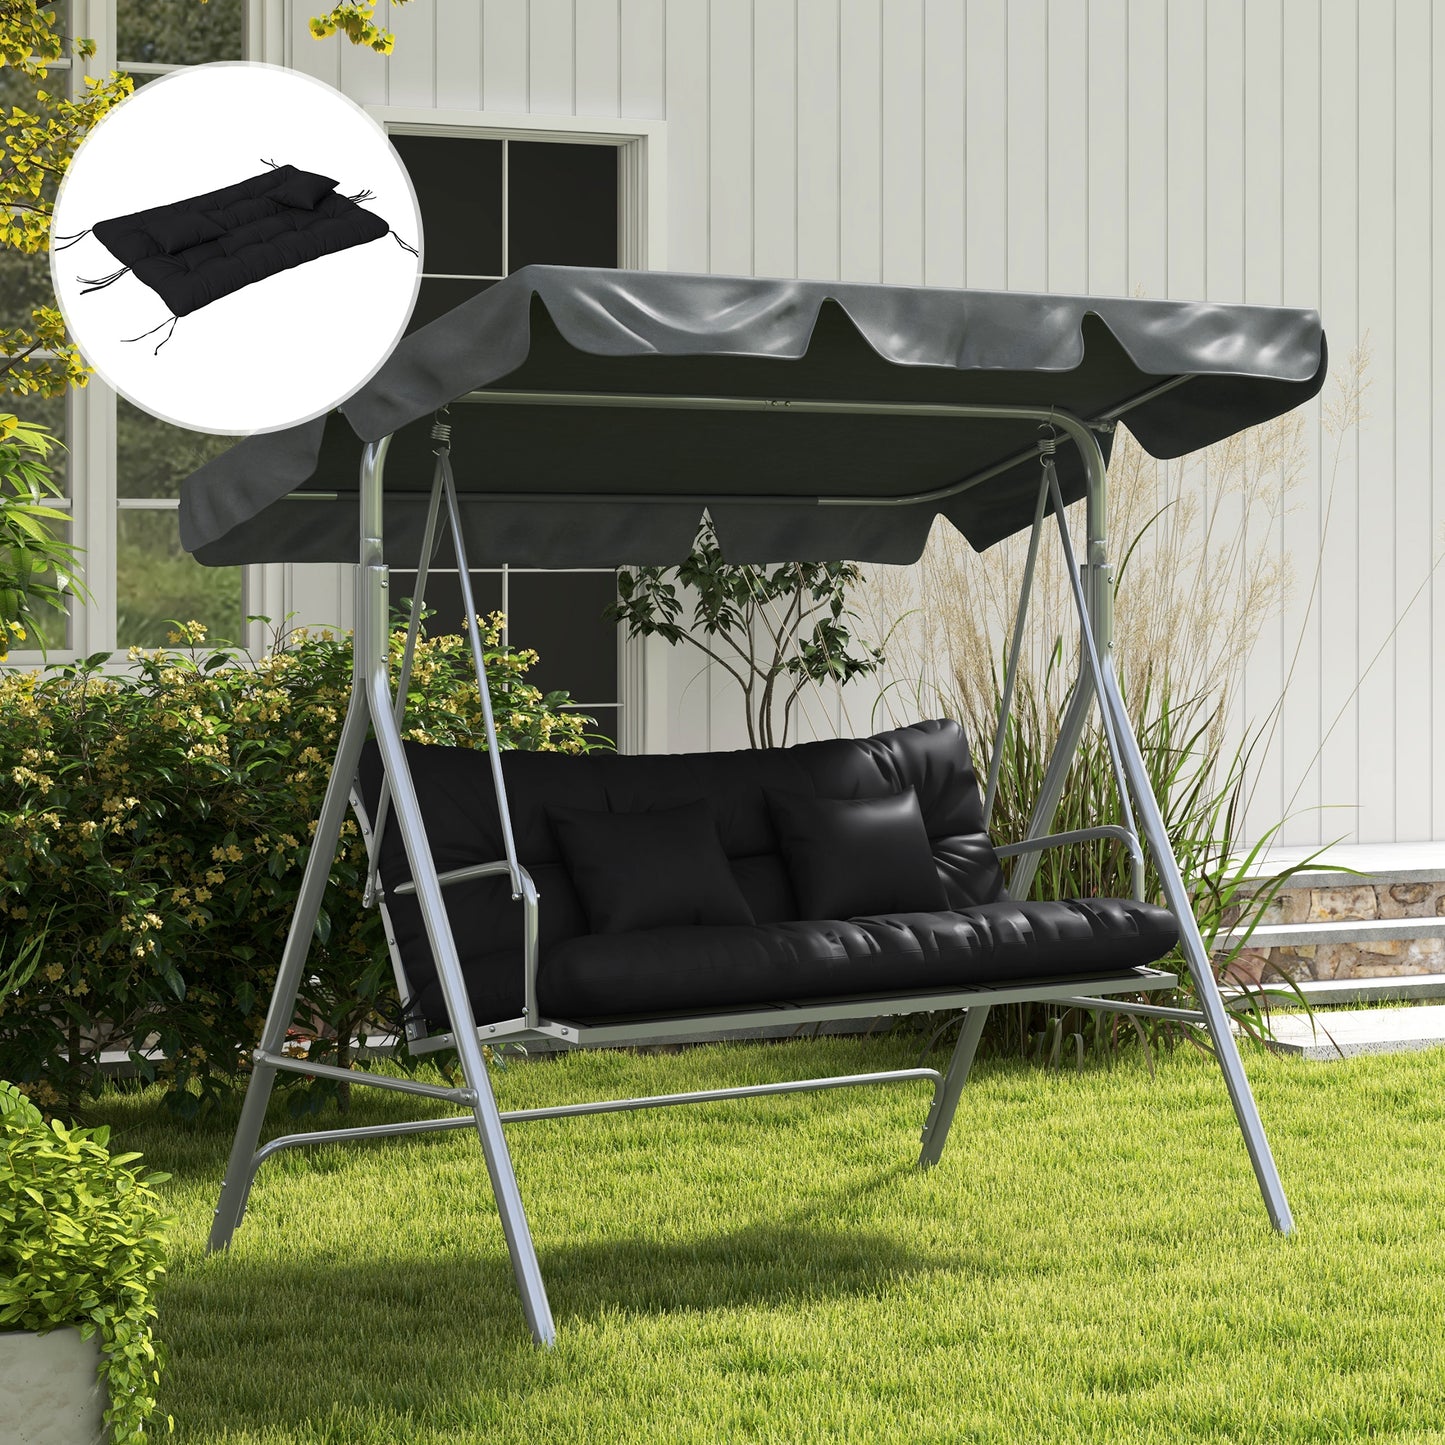 Outsunny Patio Chair Cushions: Cosy Quartet with Ties & Pillows, Backrest & Seat Set, Ebony Black